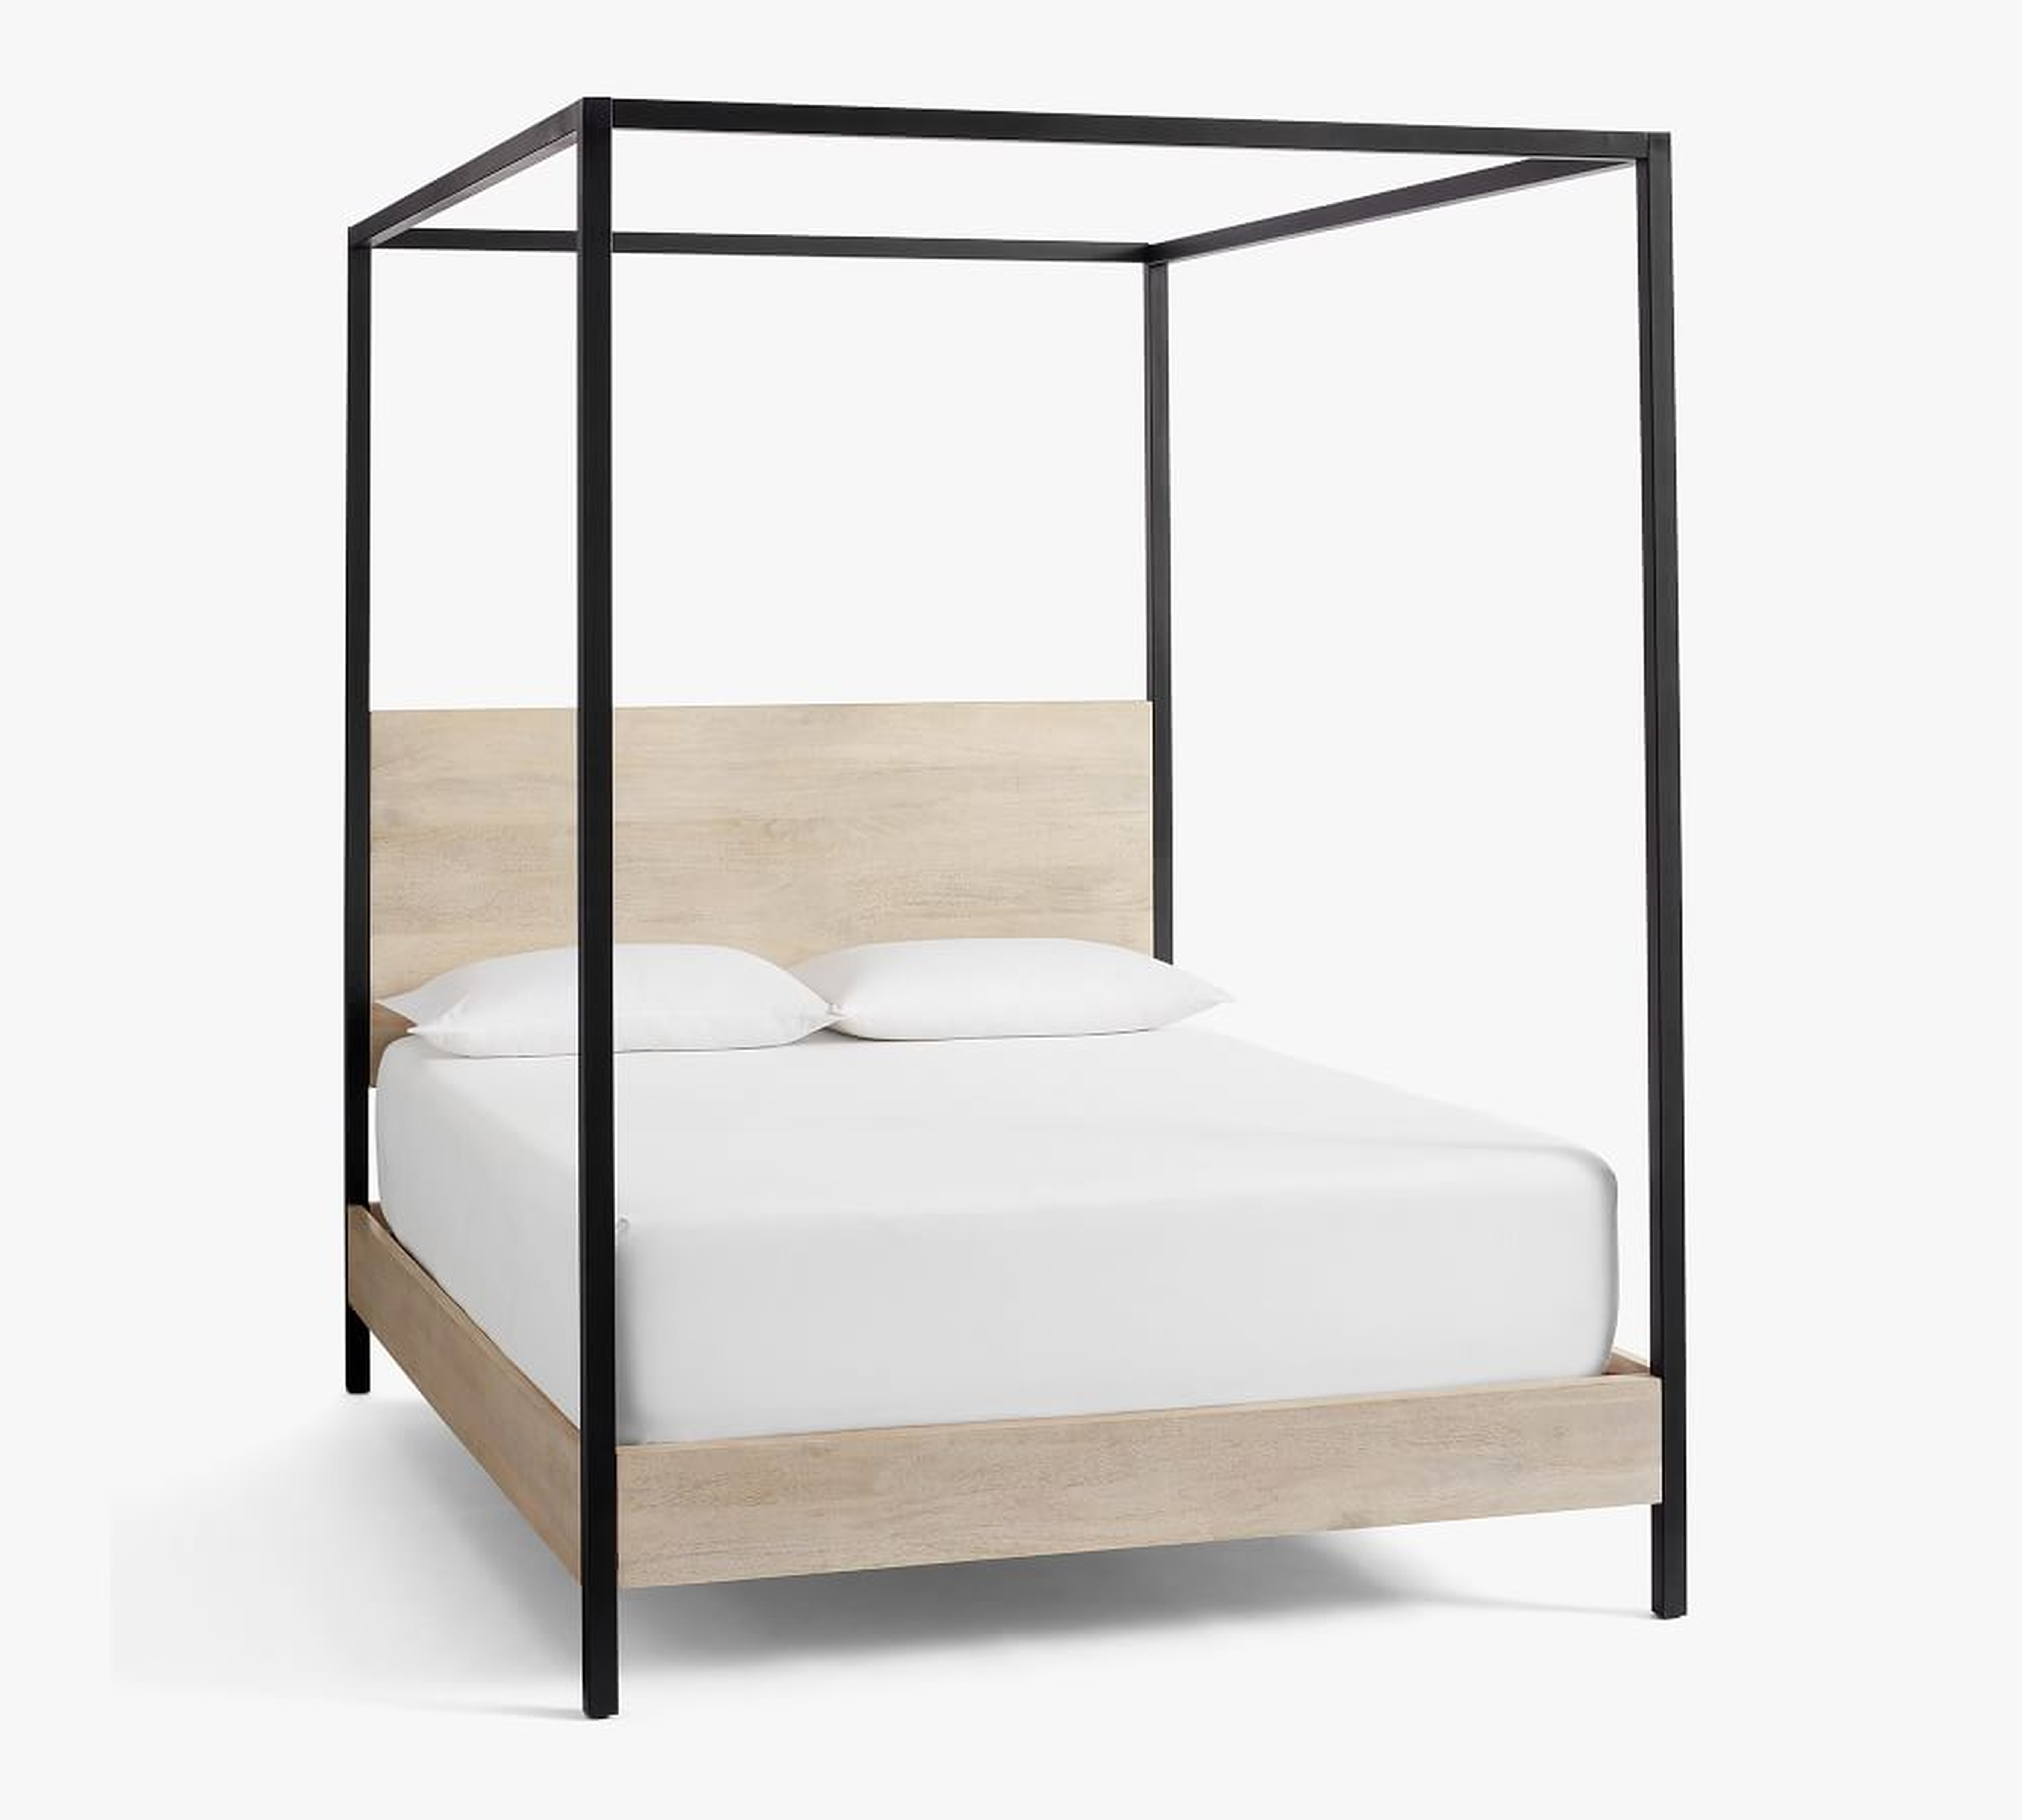 Cayman Wood & Metal Canopy Bed, King, Biscotti - Pottery Barn